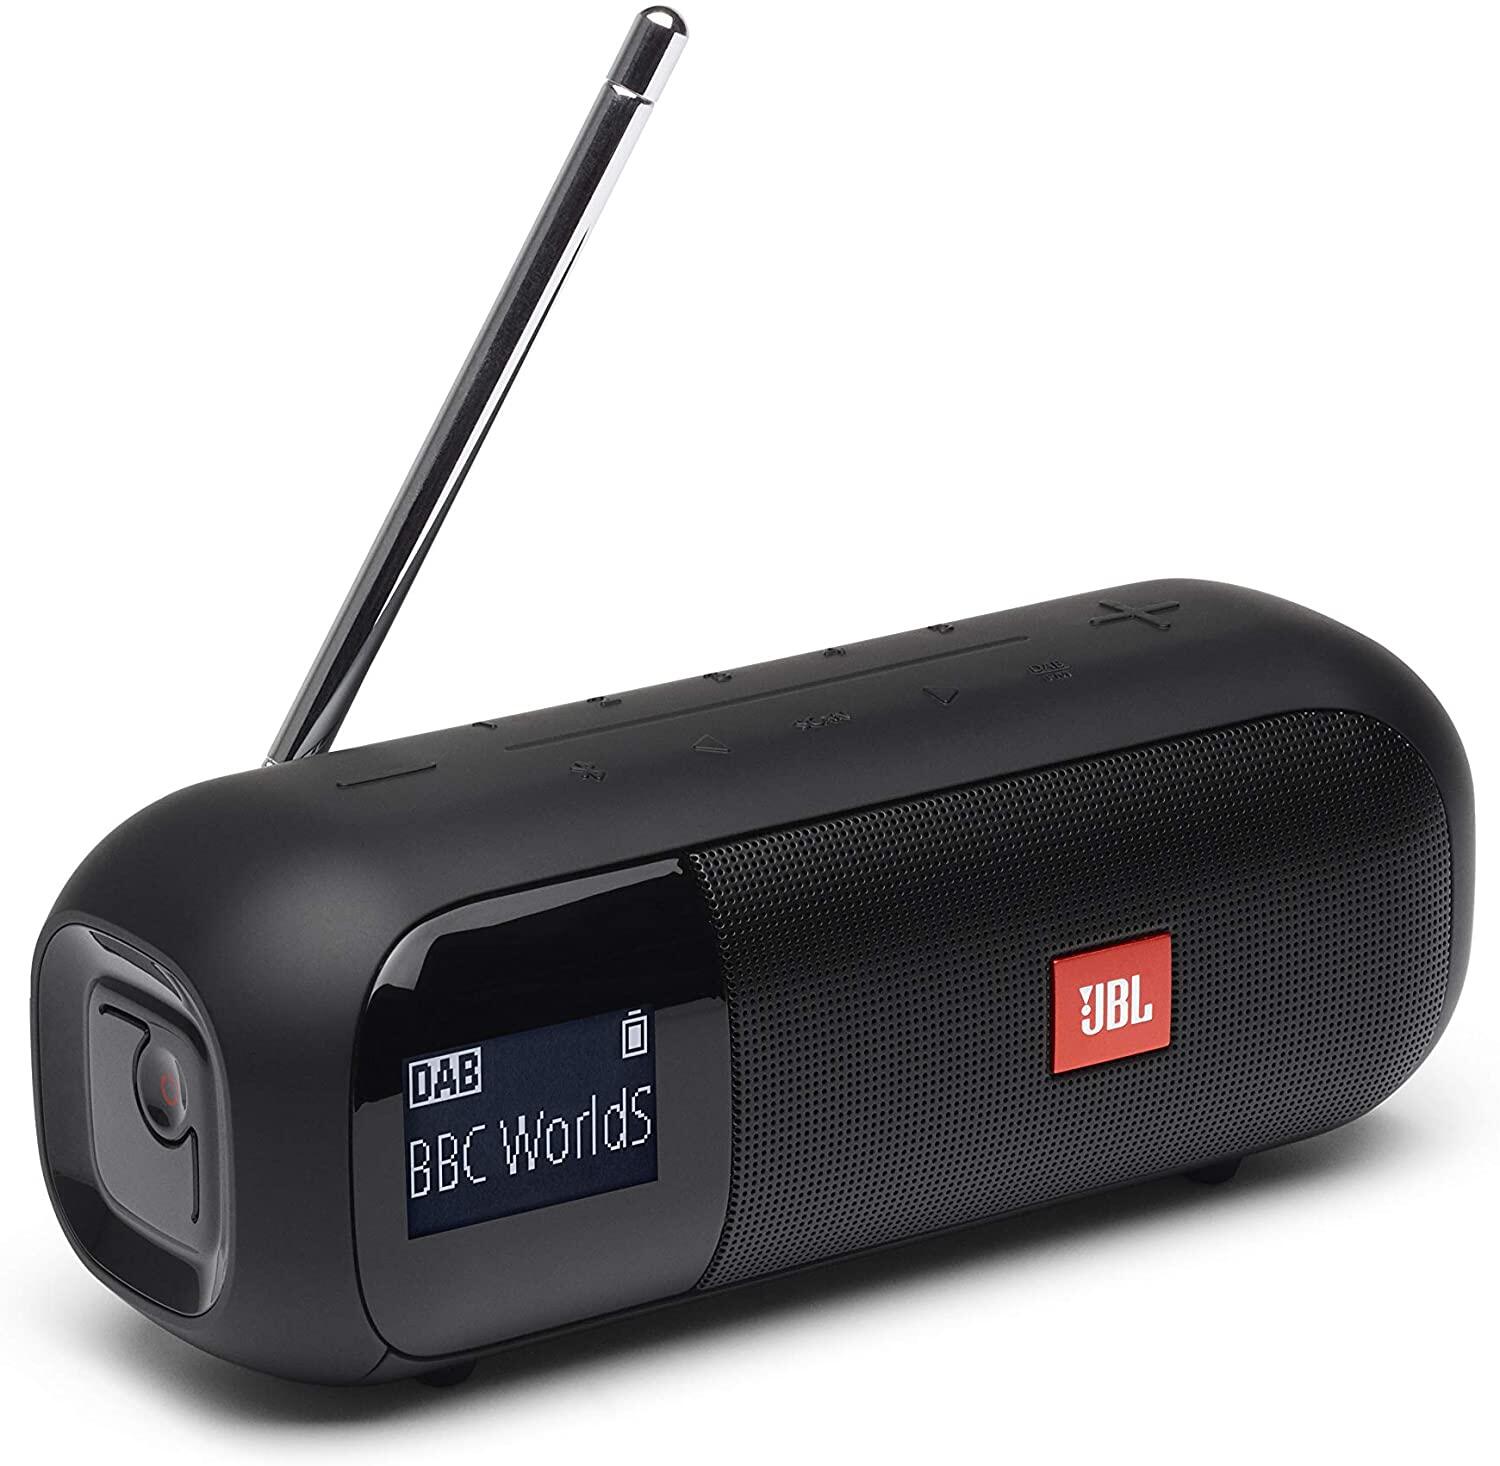 JBL Tuner 2 Portable Wireless Bluetooth Speaker with FM Radio , IPX7 Waterproof , Display Screen , Up to 12 Hours Playtime